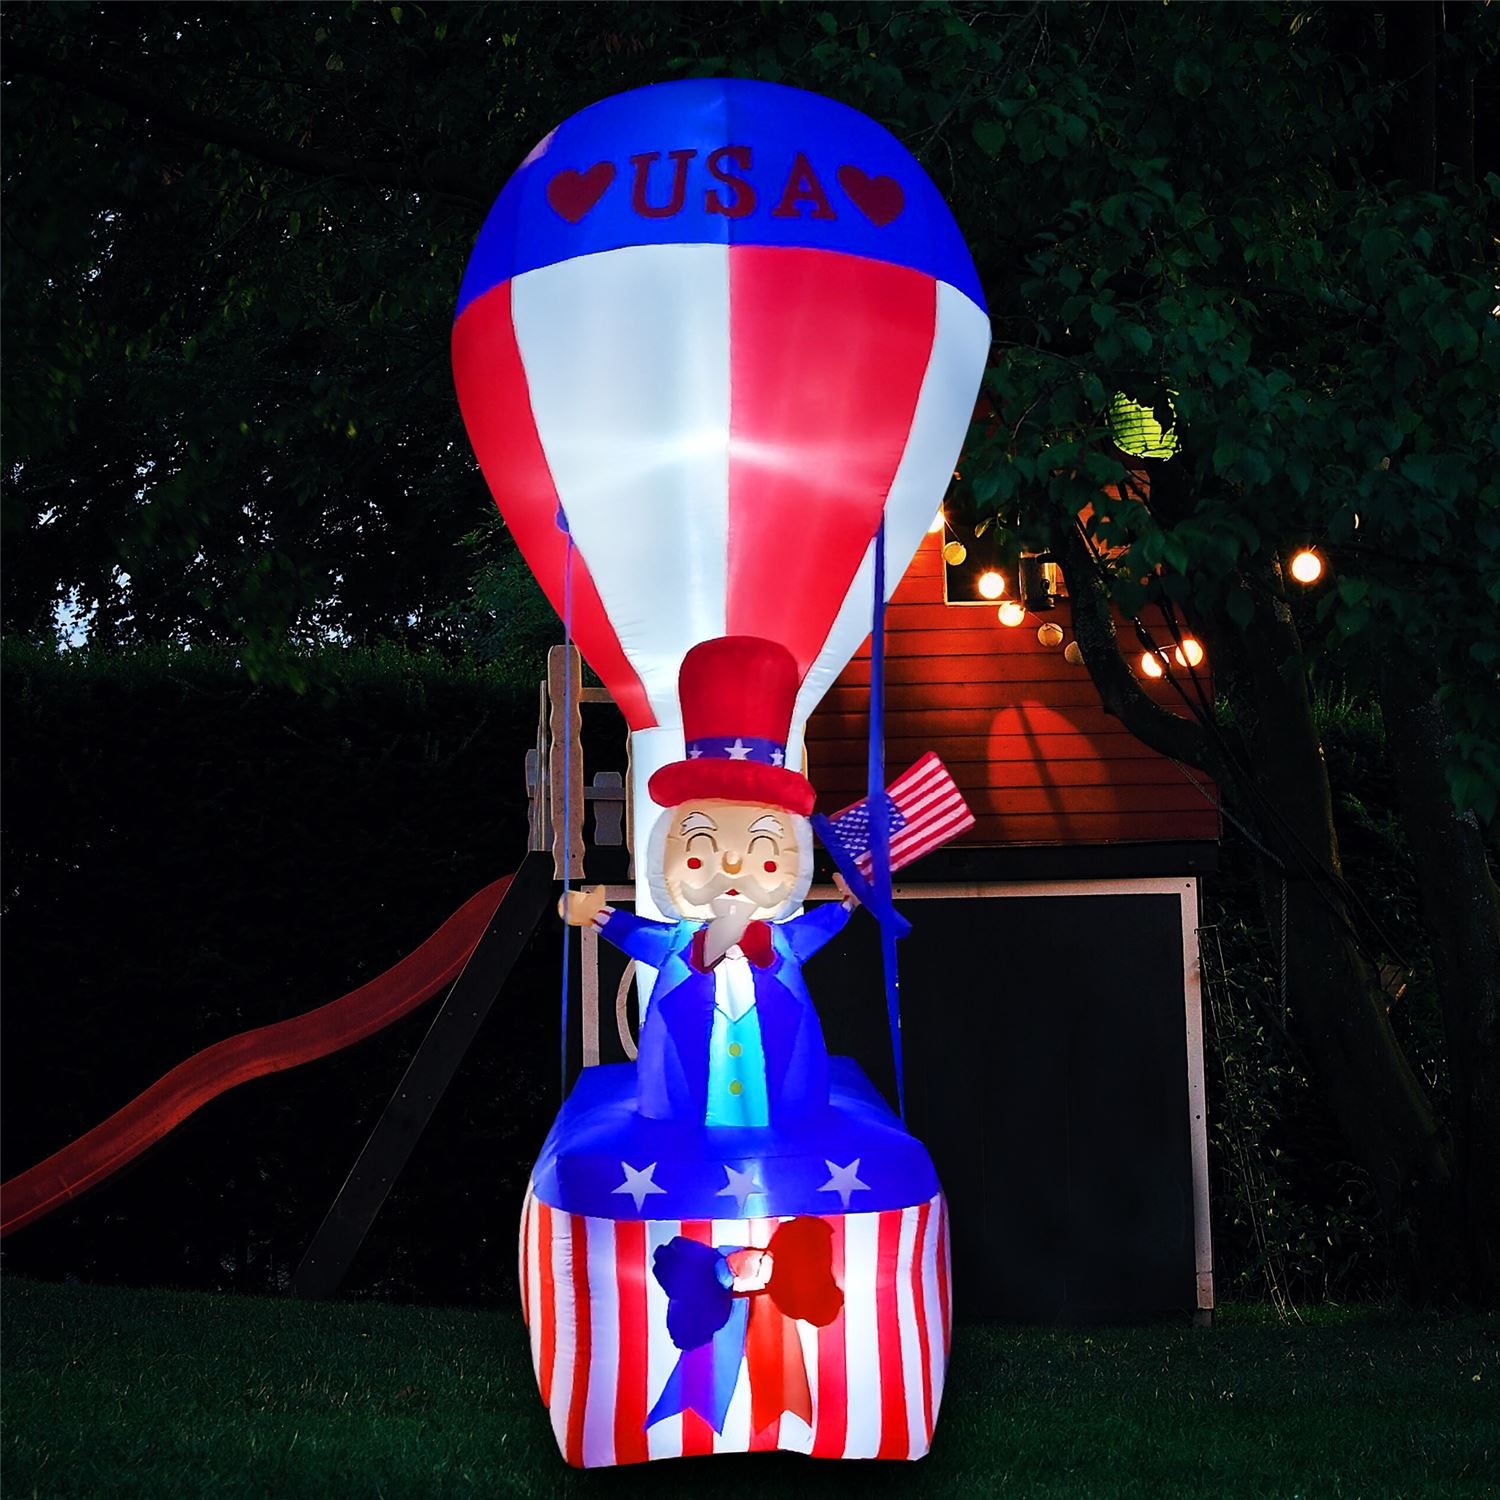 9Ft SeasonBlow Inflatable Independence Day Hot Air Balloon Uncle Sam.